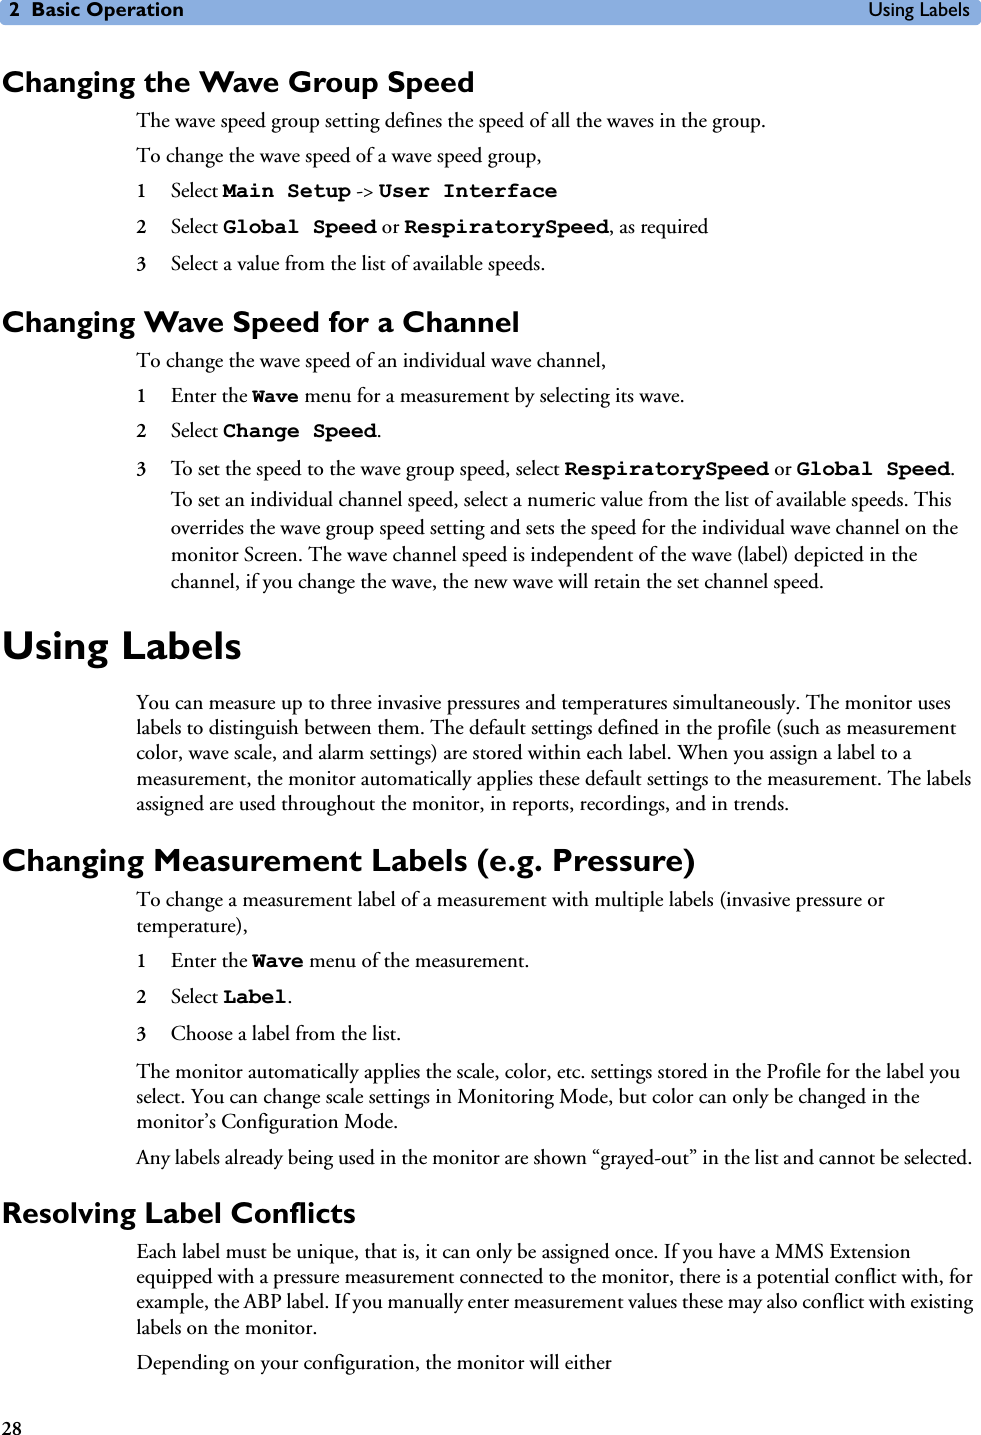 2 Basic Operation Using Labels28Changing the Wave Group SpeedThe wave speed group setting defines the speed of all the waves in the group. To change the wave speed of a wave speed group,1Select Main Setup -&gt; User Interface2Select Global Speed or RespiratorySpeed, as required3Select a value from the list of available speeds.Changing Wave Speed for a ChannelTo change the wave speed of an individual wave channel, 1Enter the Wave menu for a measurement by selecting its wave.2Select Change Speed.3To set the speed to the wave group speed, select RespiratorySpeed or Global Speed. To set an individual channel speed, select a numeric value from the list of available speeds. This overrides the wave group speed setting and sets the speed for the individual wave channel on the monitor Screen. The wave channel speed is independent of the wave (label) depicted in the channel, if you change the wave, the new wave will retain the set channel speed.Using LabelsYou can measure up to three invasive pressures and temperatures simultaneously. The monitor uses labels to distinguish between them. The default settings defined in the profile (such as measurement color, wave scale, and alarm settings) are stored within each label. When you assign a label to a measurement, the monitor automatically applies these default settings to the measurement. The labels assigned are used throughout the monitor, in reports, recordings, and in trends.Changing Measurement Labels (e.g. Pressure)To change a measurement label of a measurement with multiple labels (invasive pressure or temperature),1Enter the Wave menu of the measurement. 2Select Label.3Choose a label from the list.The monitor automatically applies the scale, color, etc. settings stored in the Profile for the label you select. You can change scale settings in Monitoring Mode, but color can only be changed in the monitor’s Configuration Mode. Any labels already being used in the monitor are shown “grayed-out” in the list and cannot be selected. Resolving Label ConflictsEach label must be unique, that is, it can only be assigned once. If you have a MMS Extension equipped with a pressure measurement connected to the monitor, there is a potential conflict with, for example, the ABP label. If you manually enter measurement values these may also conflict with existing labels on the monitor.Depending on your configuration, the monitor will either 